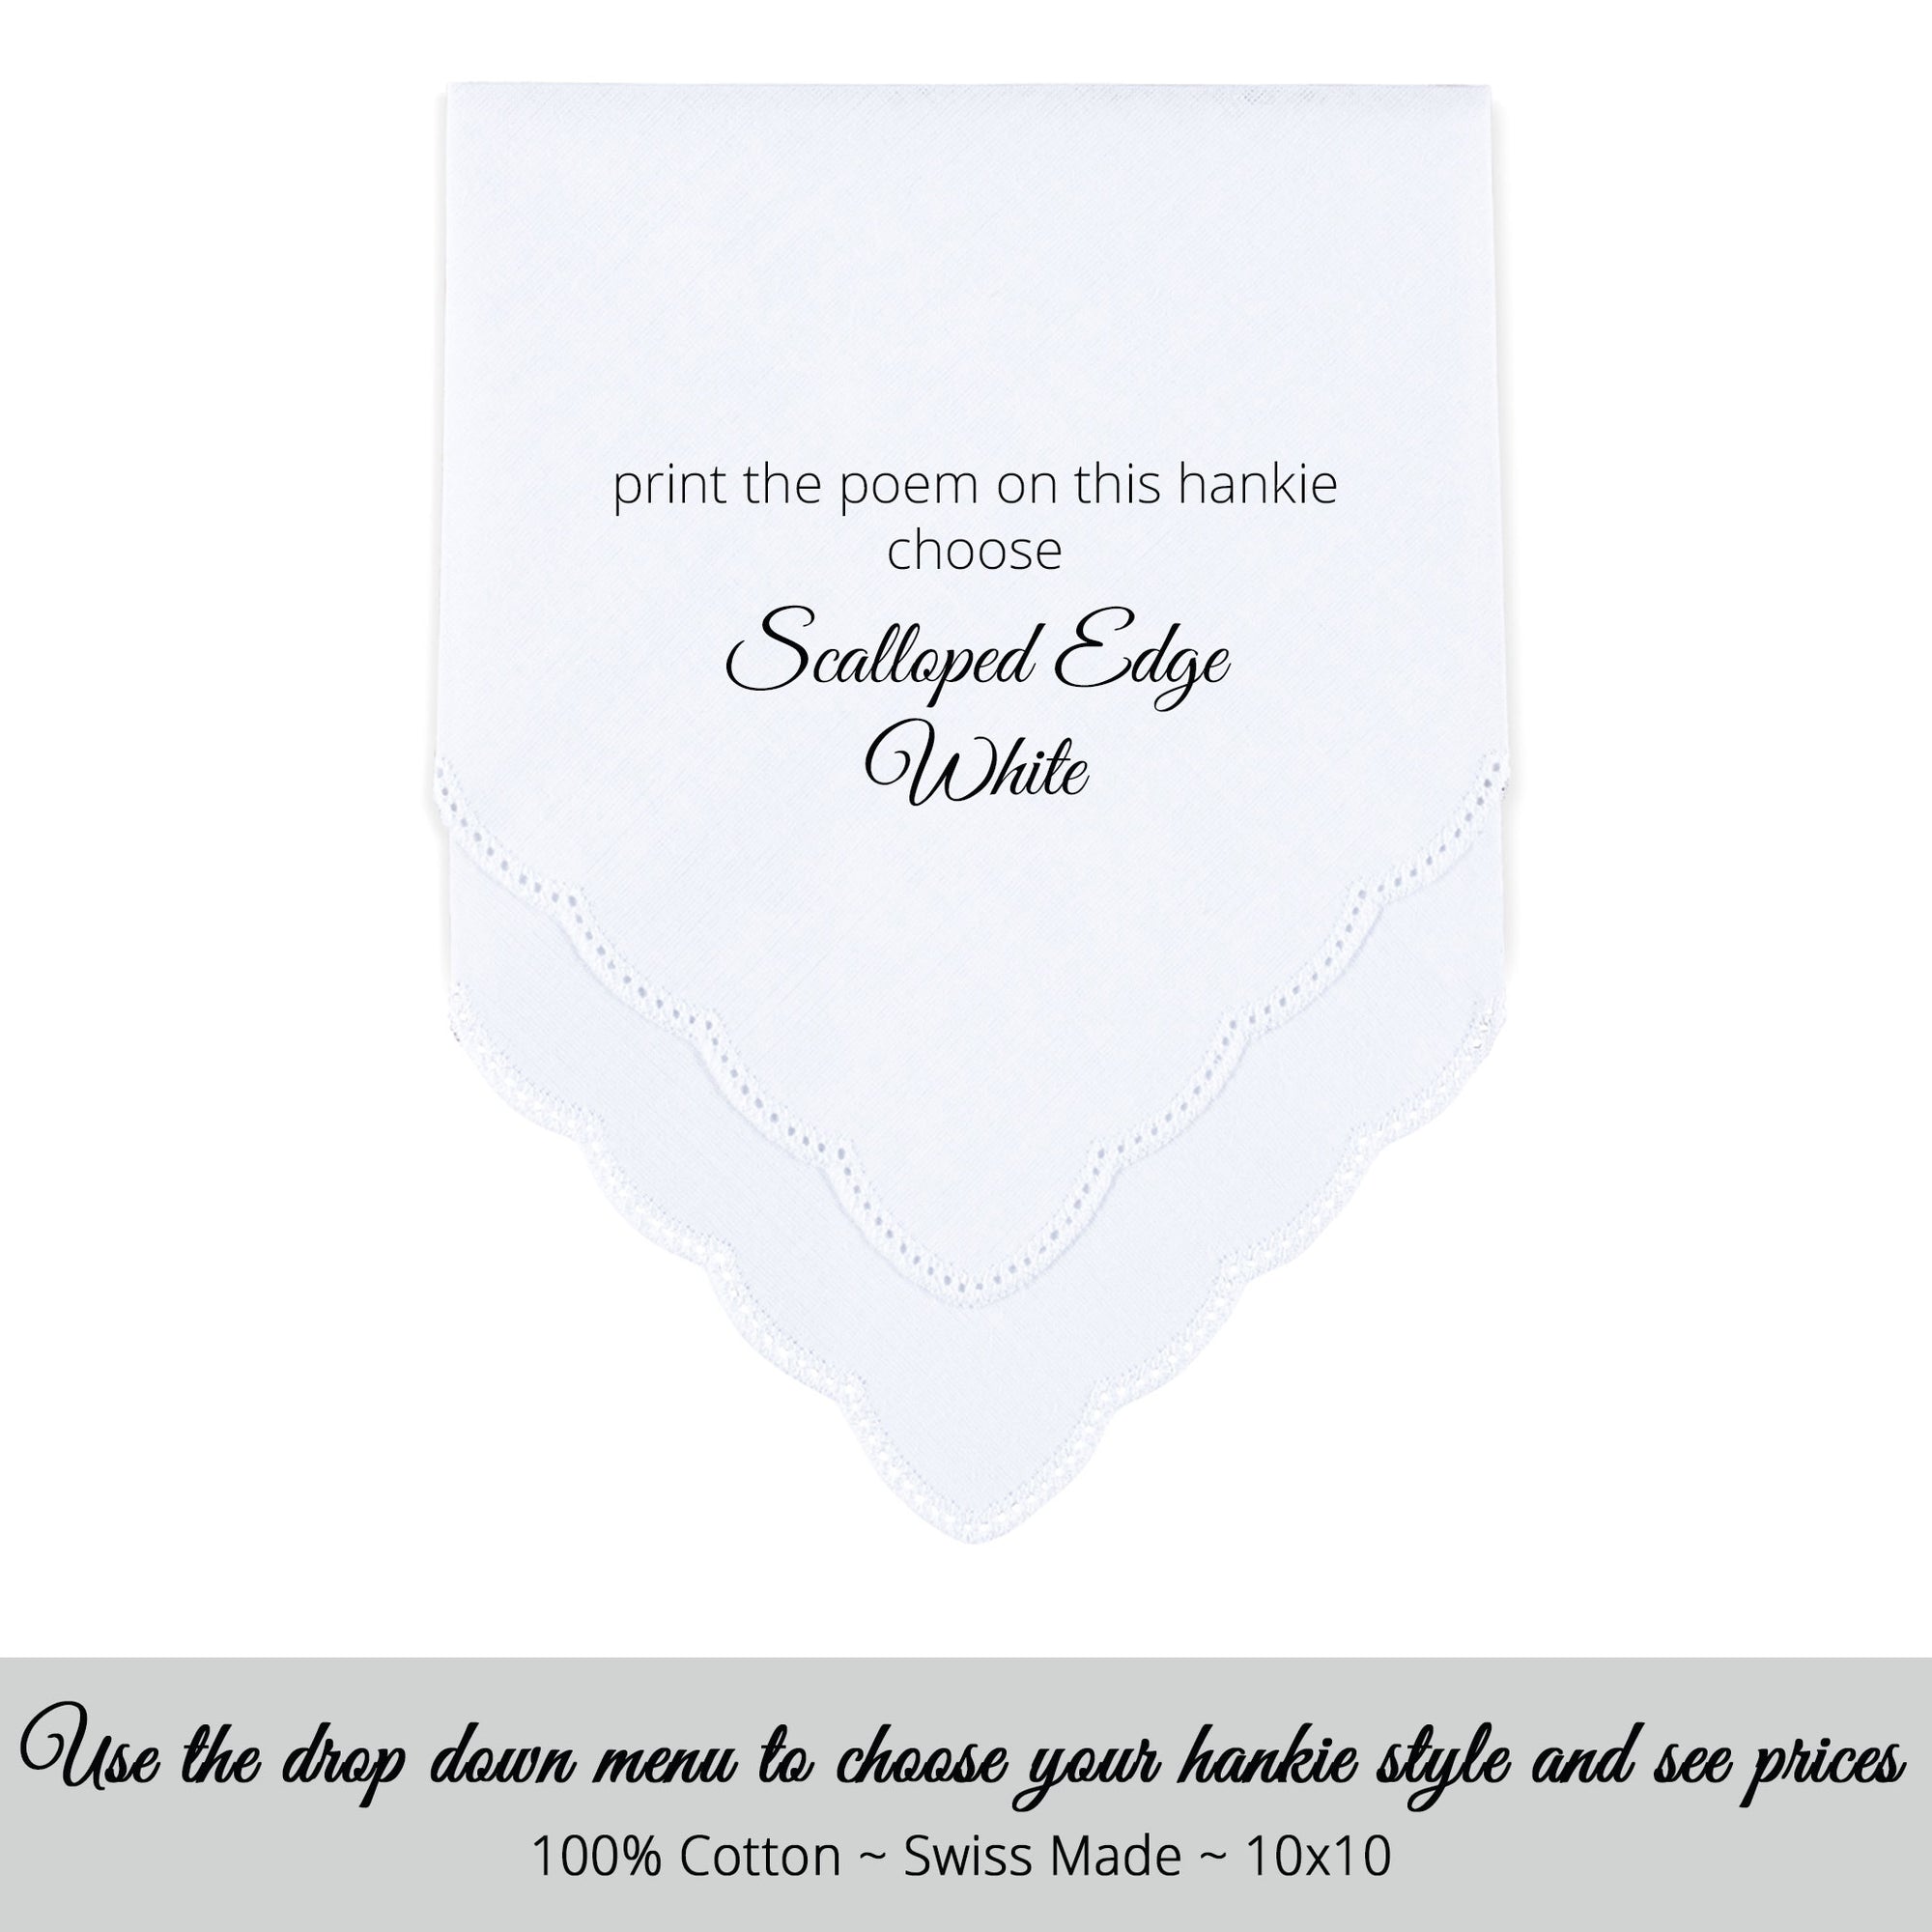 Wedding Handkerchief Scalloped edge white personalized poem for the stepmother of the bride